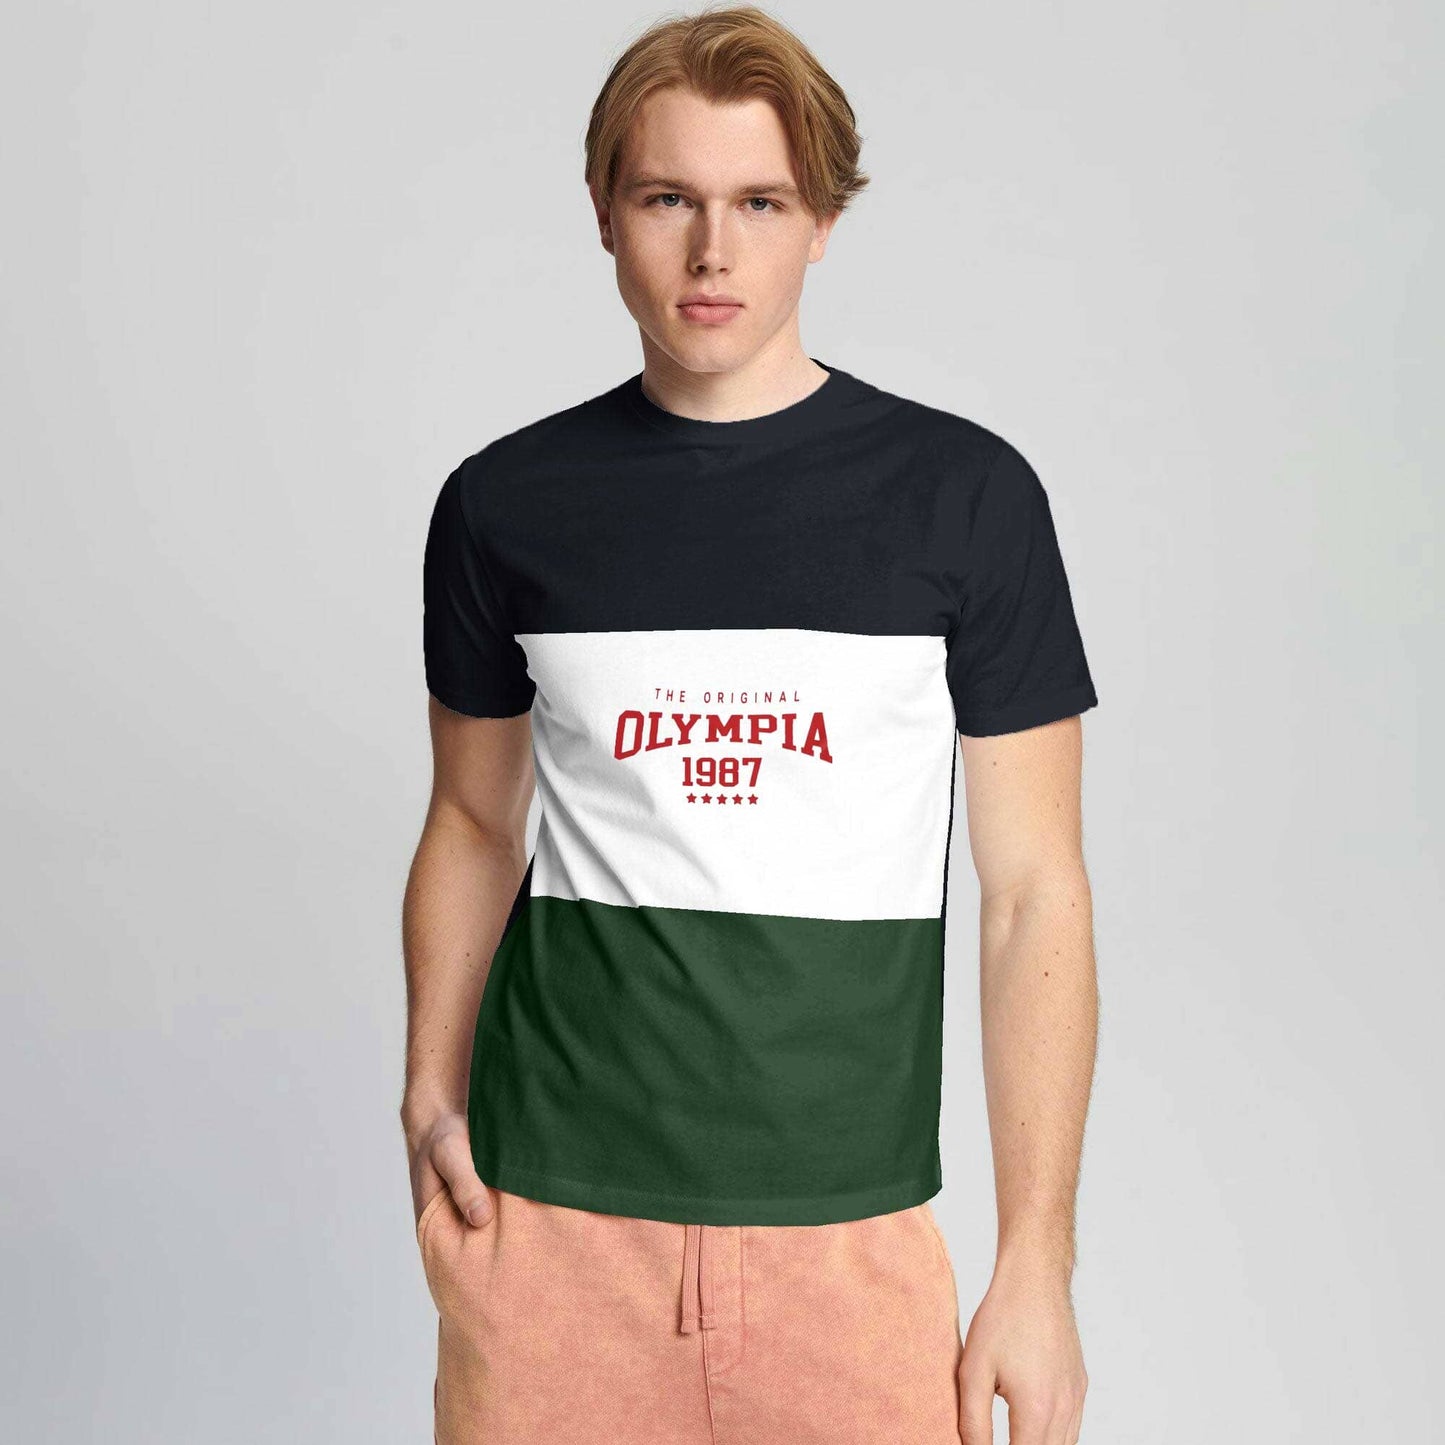 Polo Republica Men's Olympia Printed Contrast Panel Tee Shirt Men's Tee Shirt Polo Republica Navy & Bottle Green S 